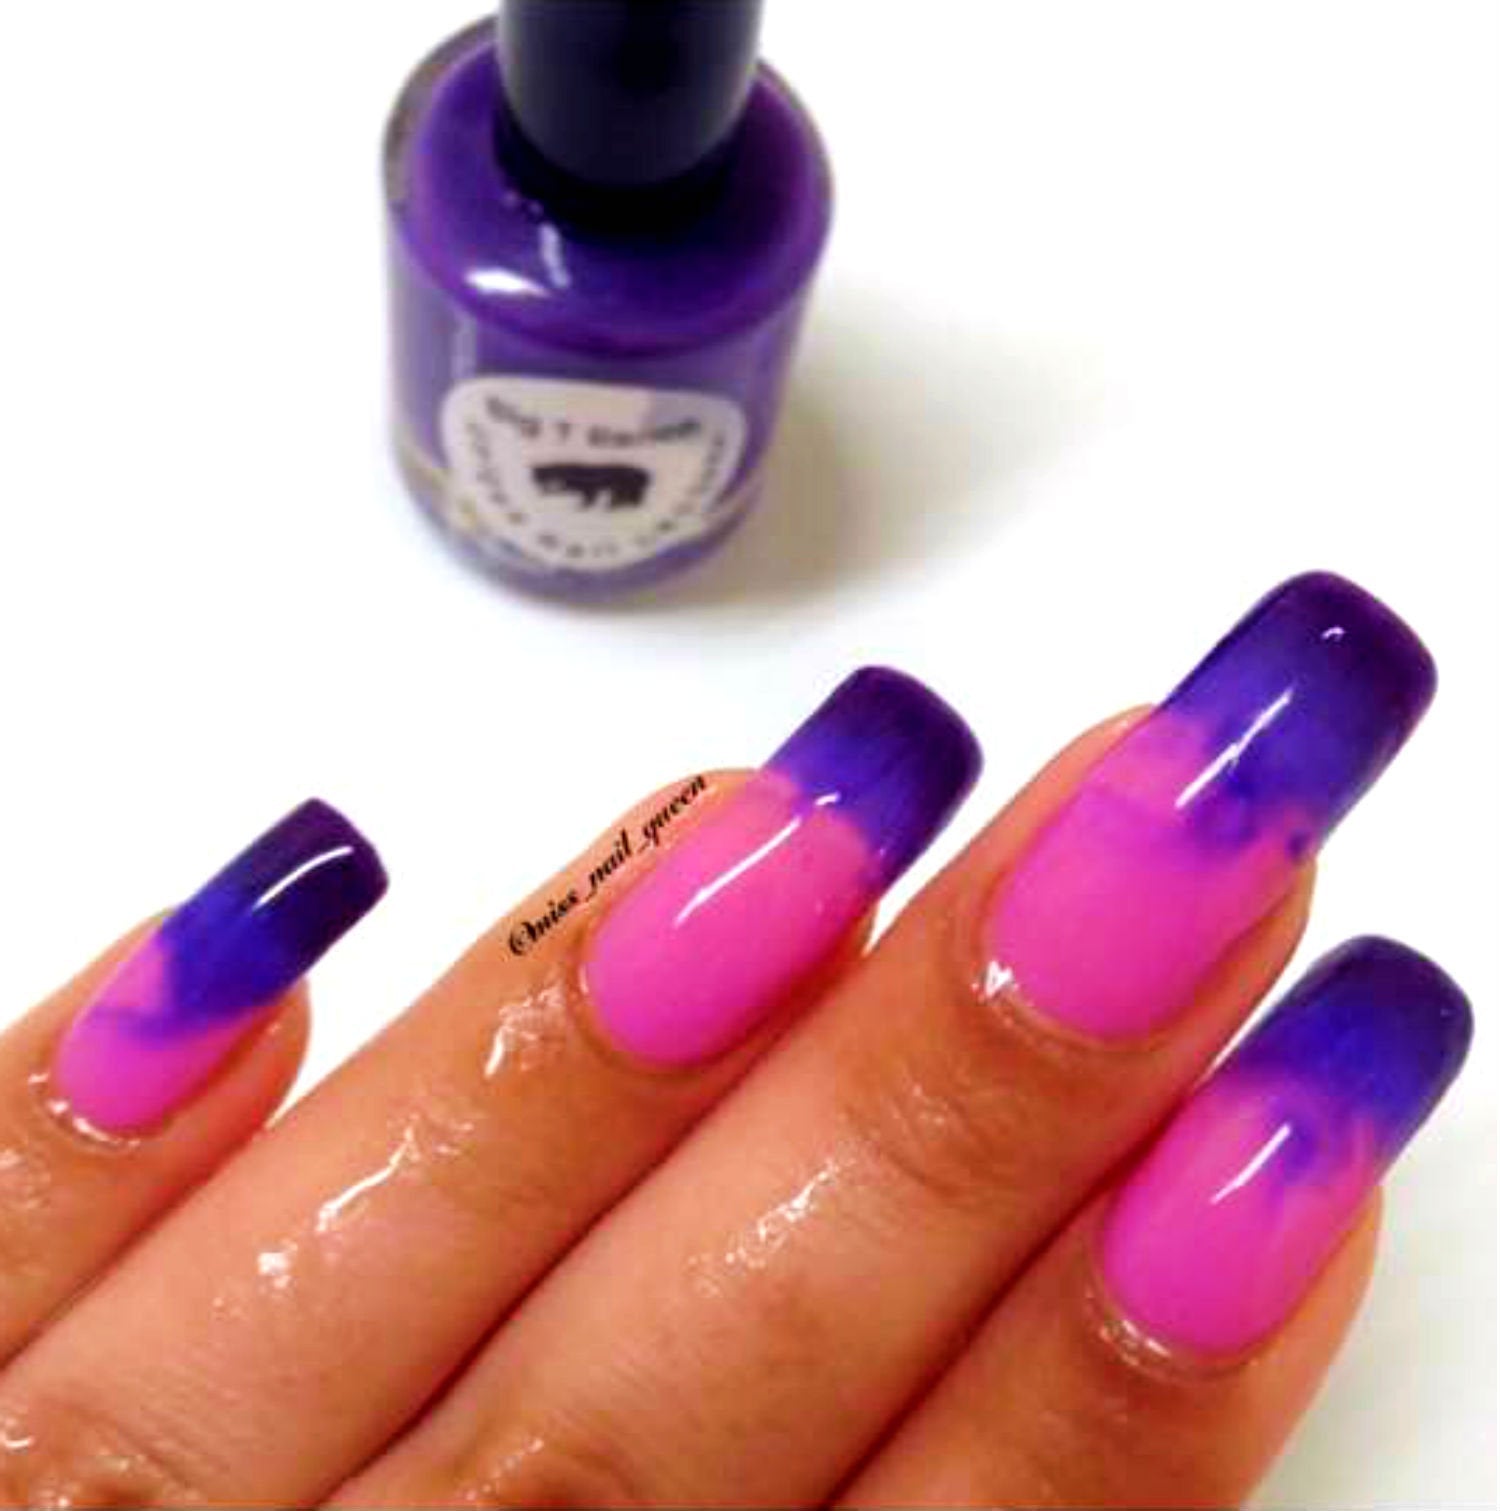 yolai color changing gel nail polish temperature changing pink purple with  glitter ombre nail art soak long lasting manicure colors kit holiday gift  10ml - Walmart.com